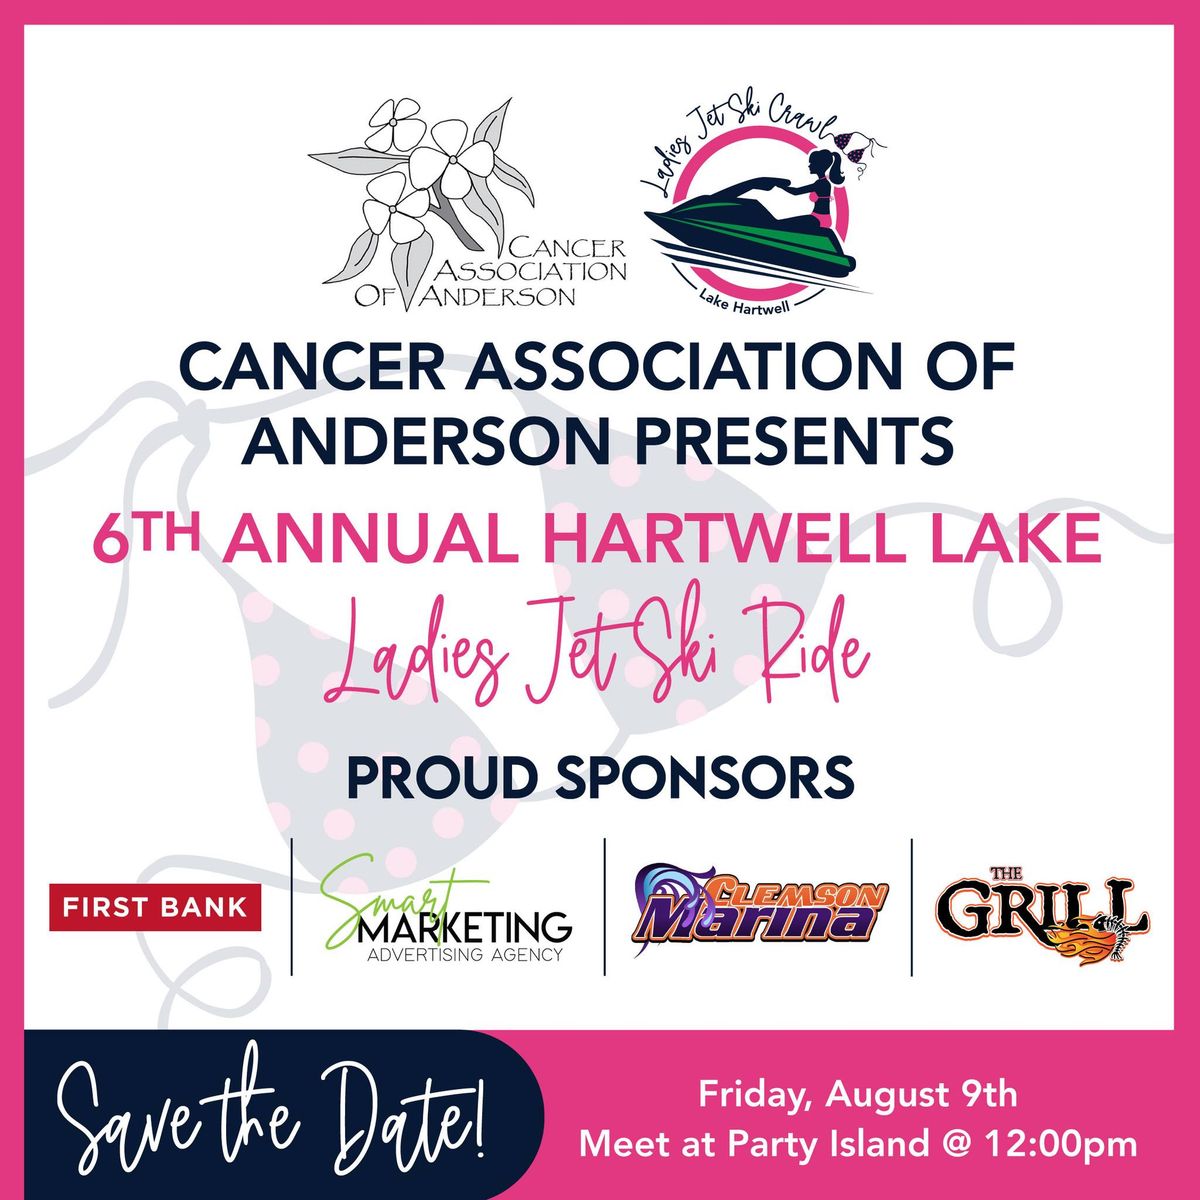 Cancer Association of Anderson's 6th Annual Hartwell Lake Ladies Jet Ski Ride